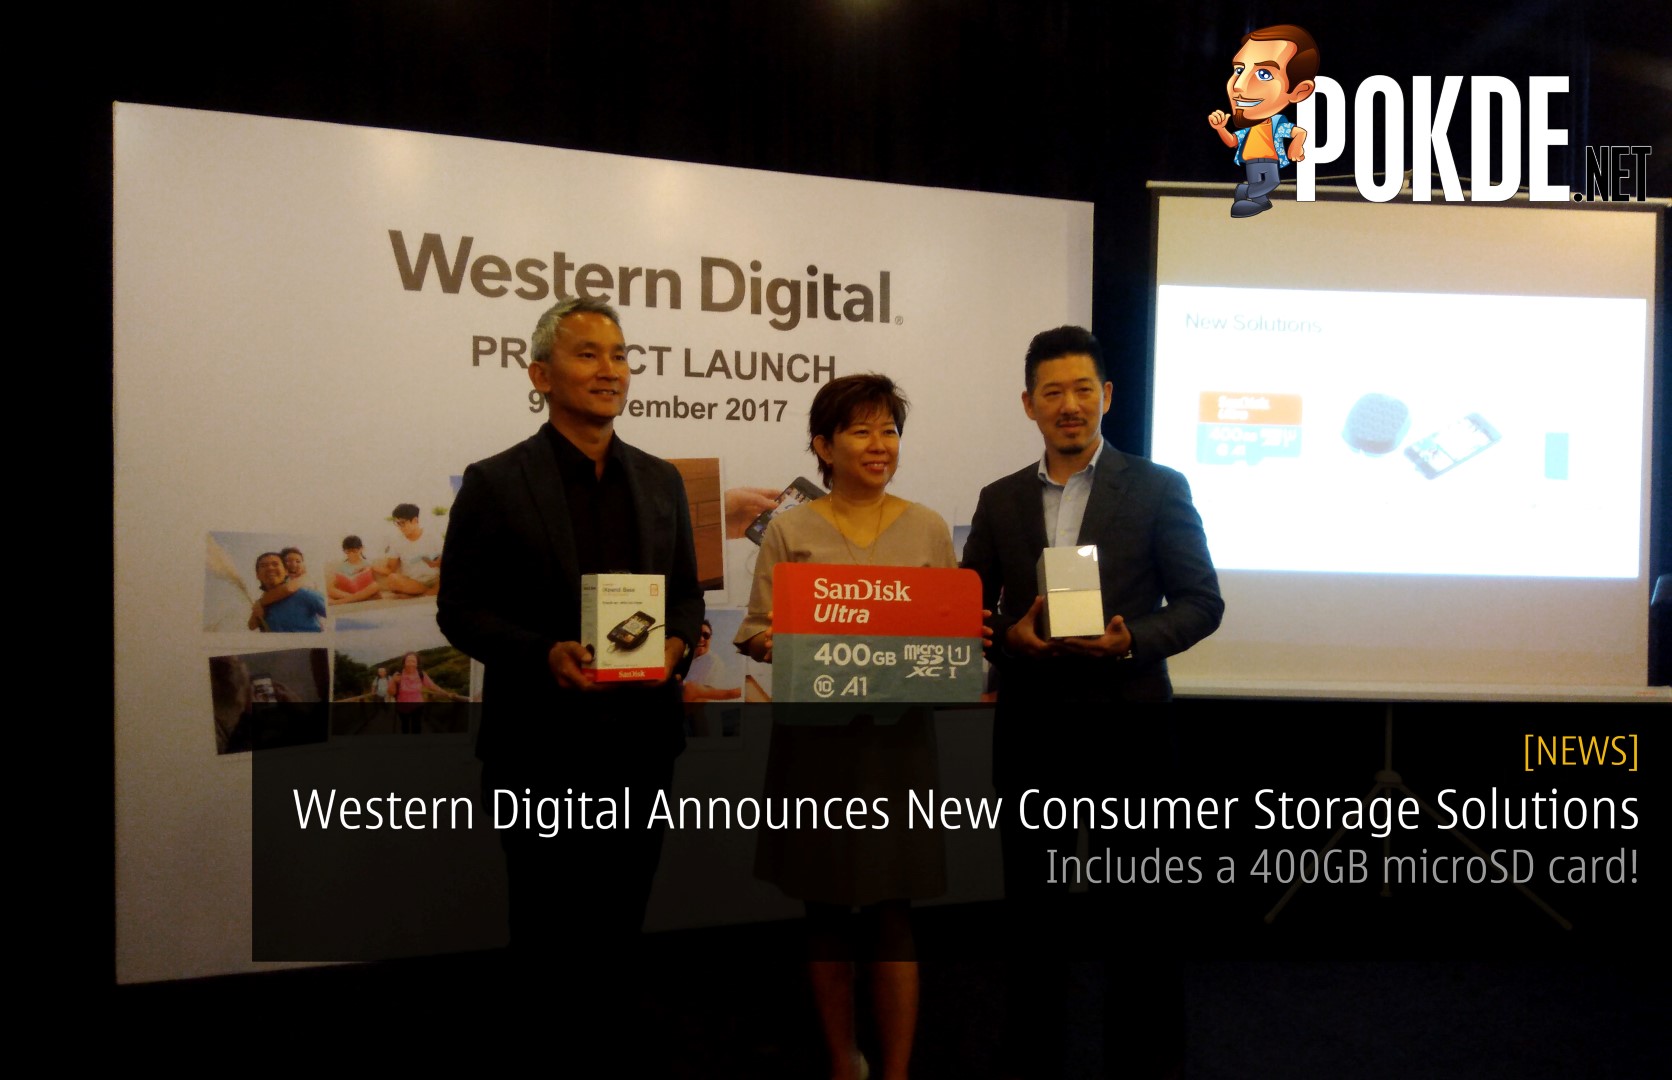 Western Digital Announces New Consumer Storage Solutions - Includes a 400GB microSD card! 30